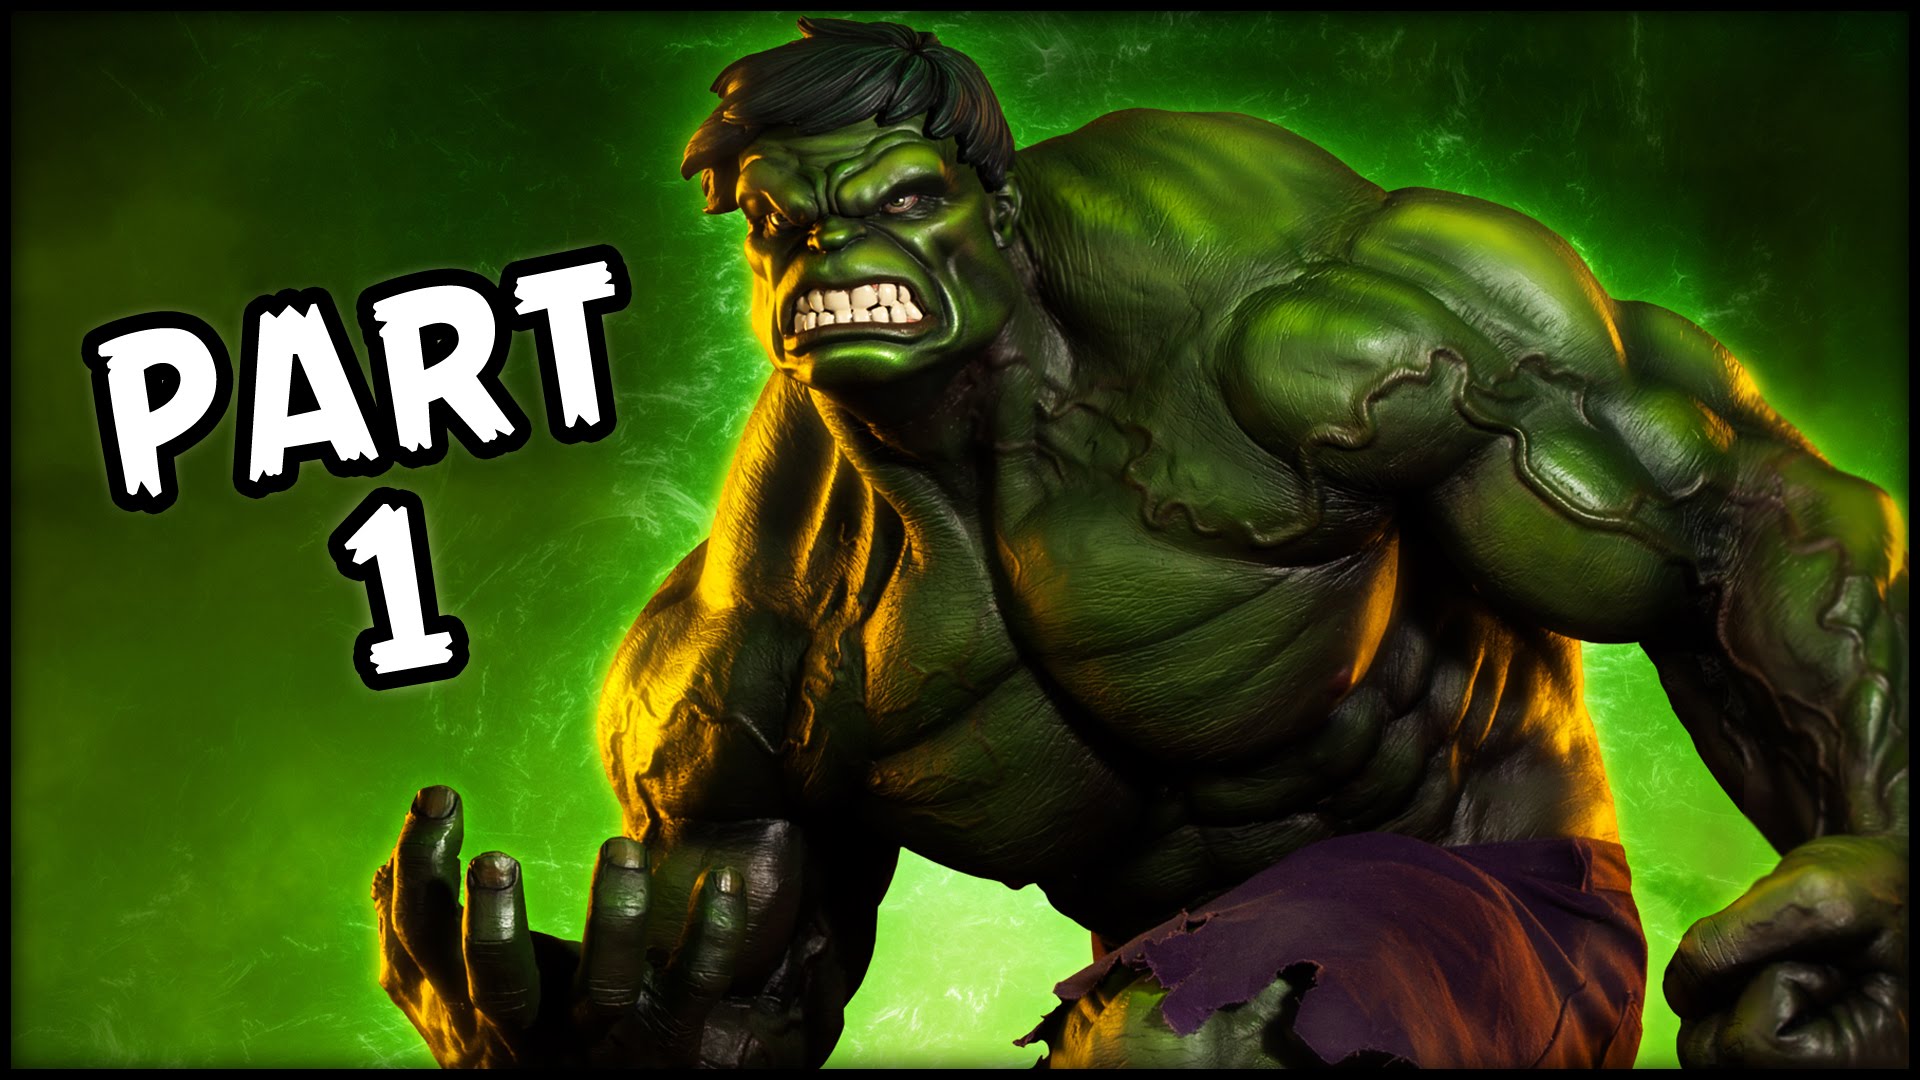 Incredible Hulk Backgrounds, Compatible - PC, Mobile, Gadgets| 1920x1080 px